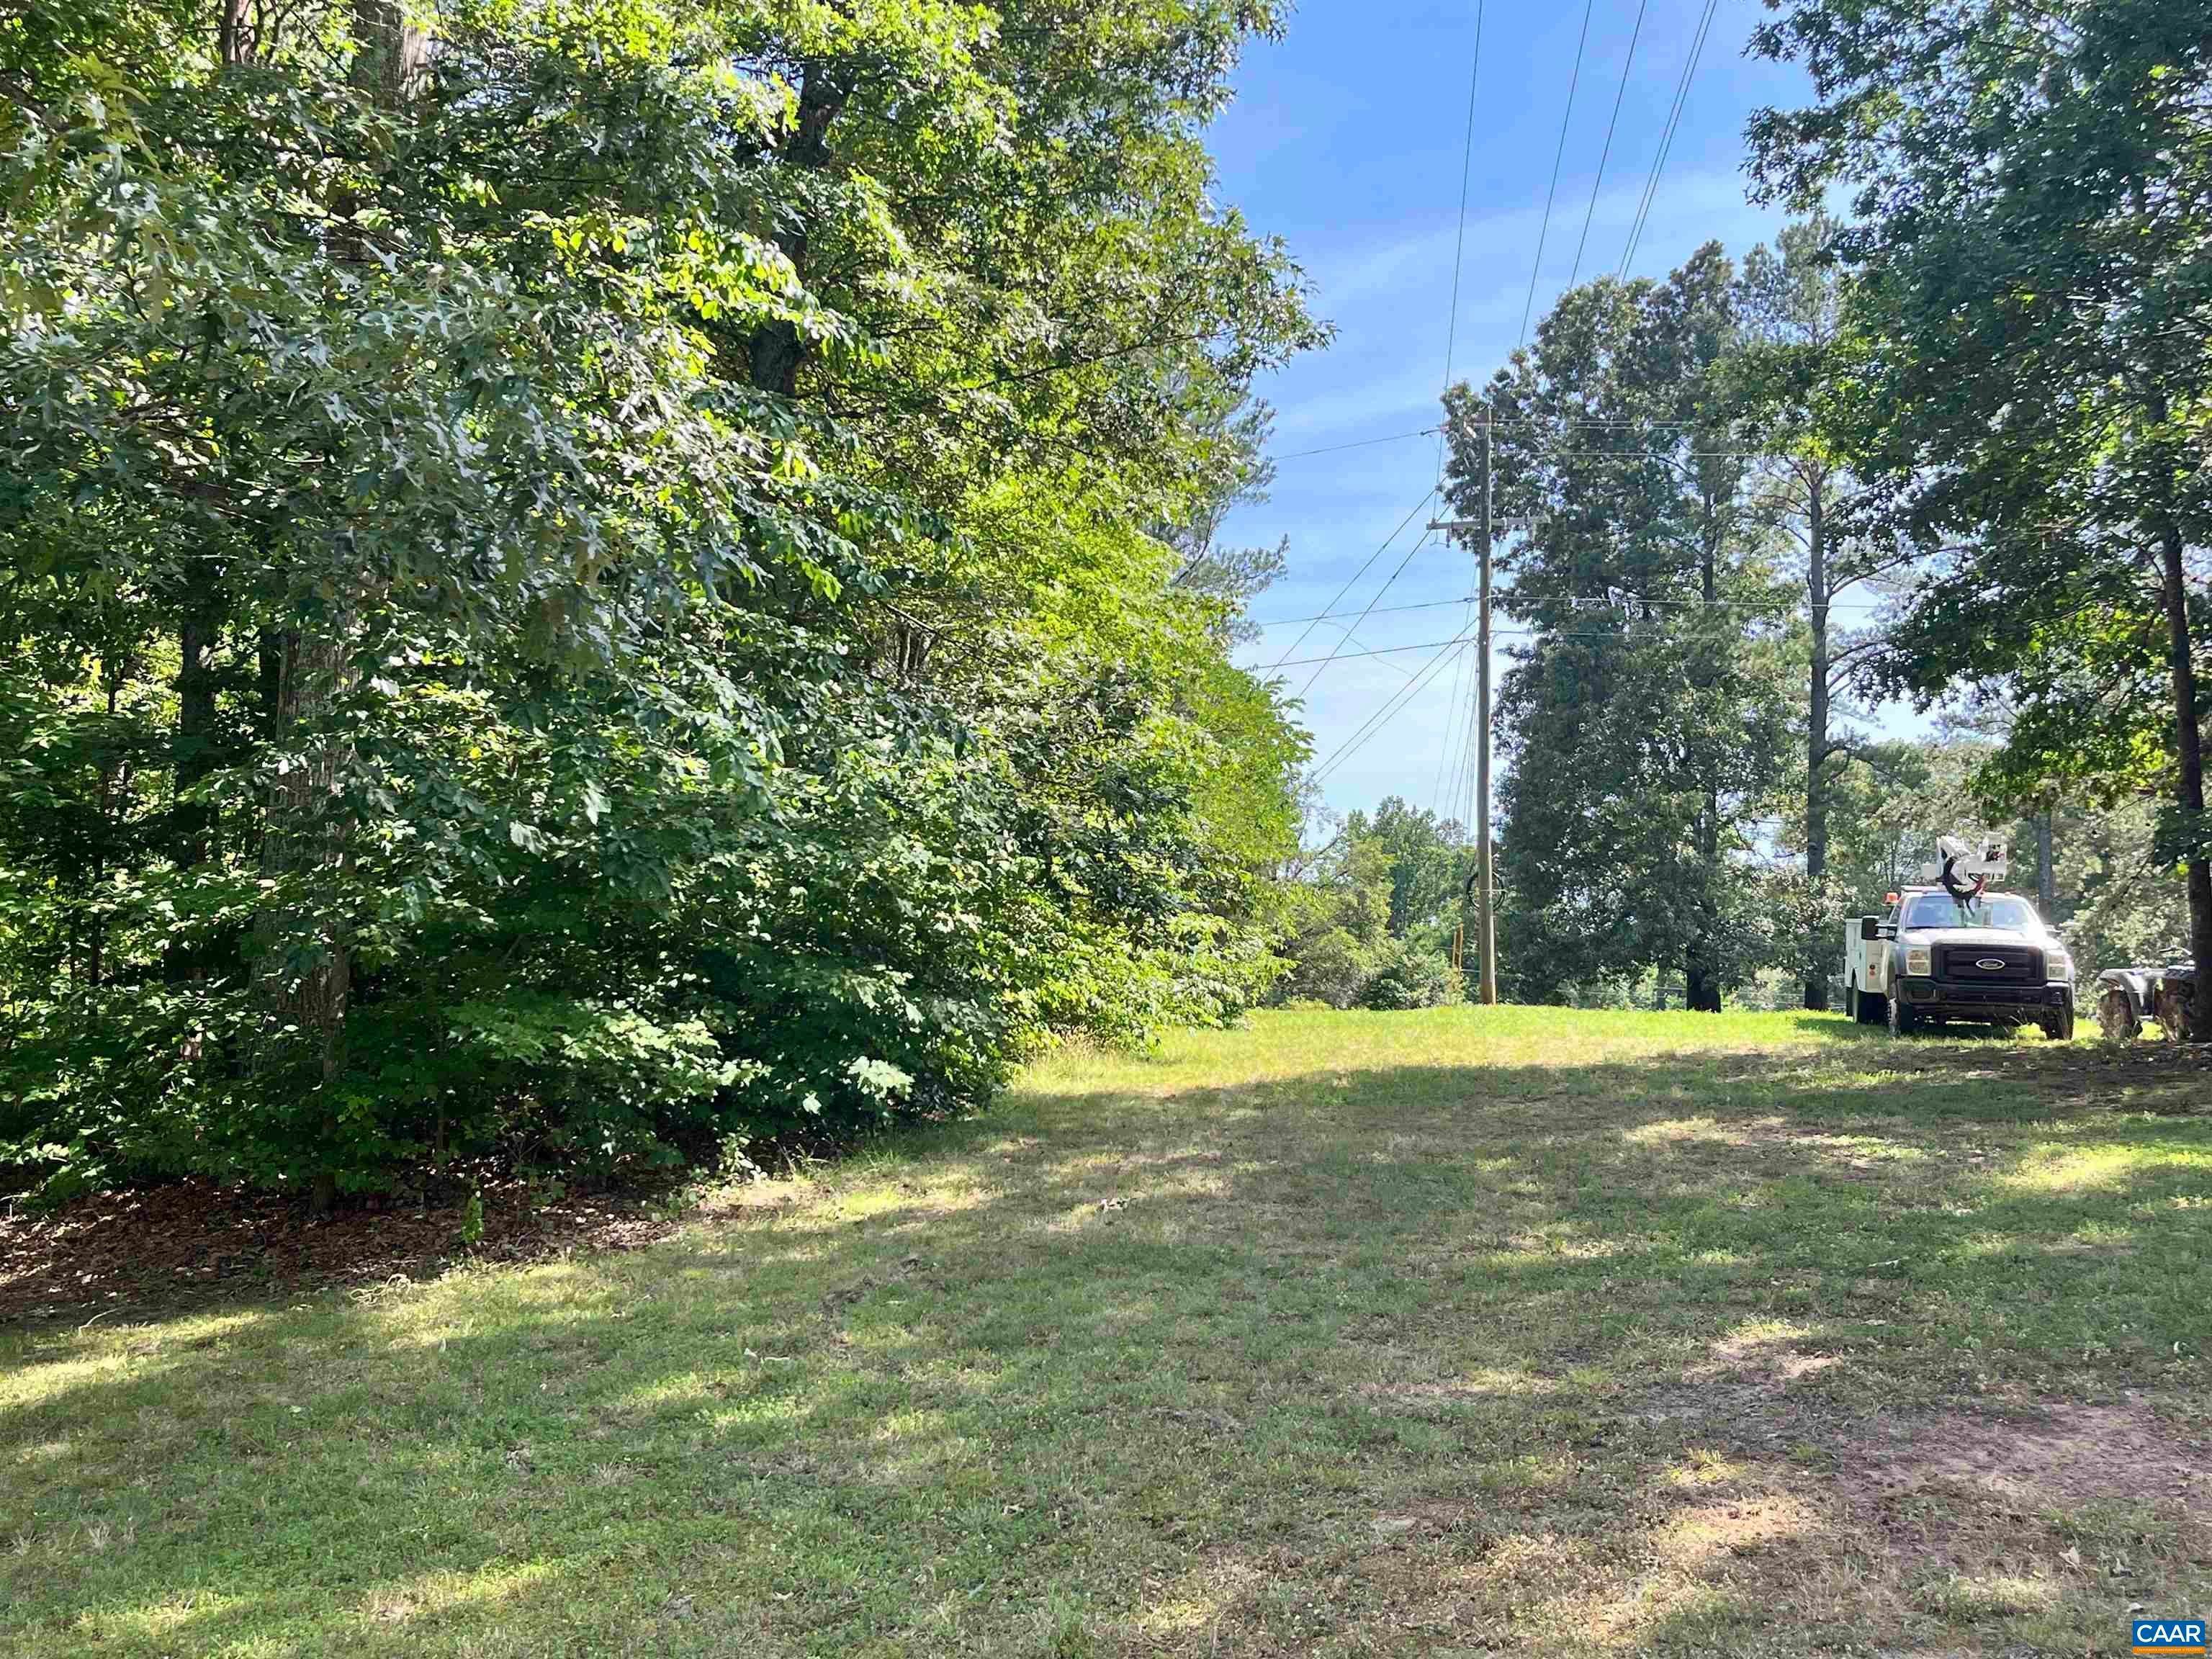 6. Land for Sale at TBD OLD LYNCHBURG Road Charlottesville, Virginia 22903 United States